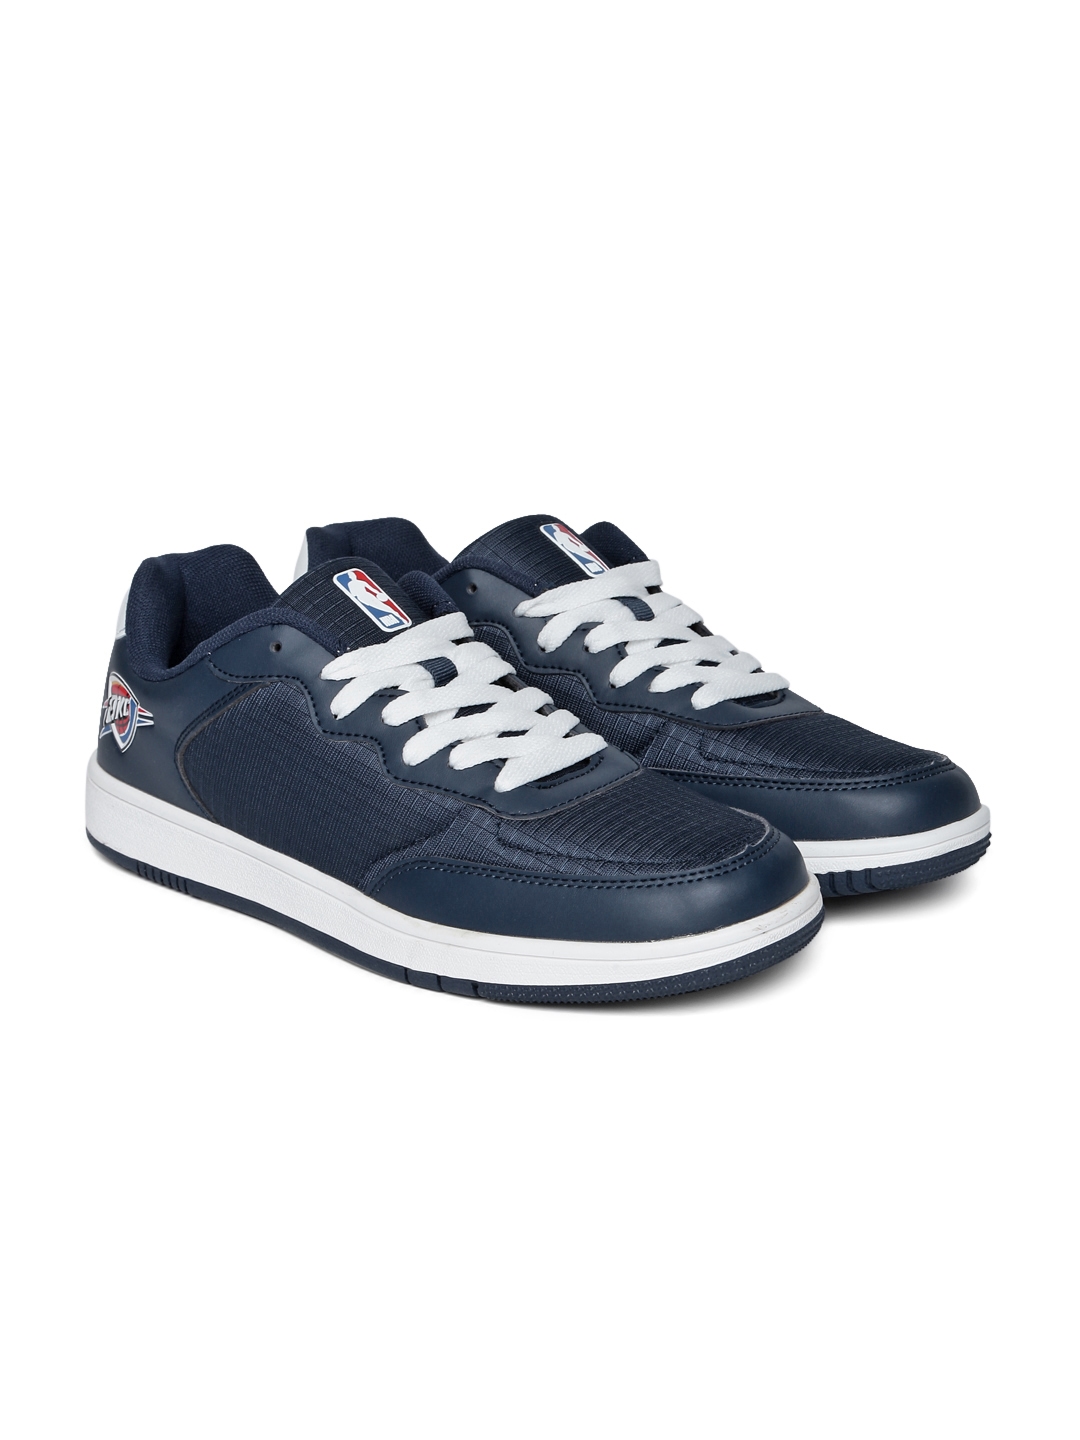 navy blue casual mens shoes